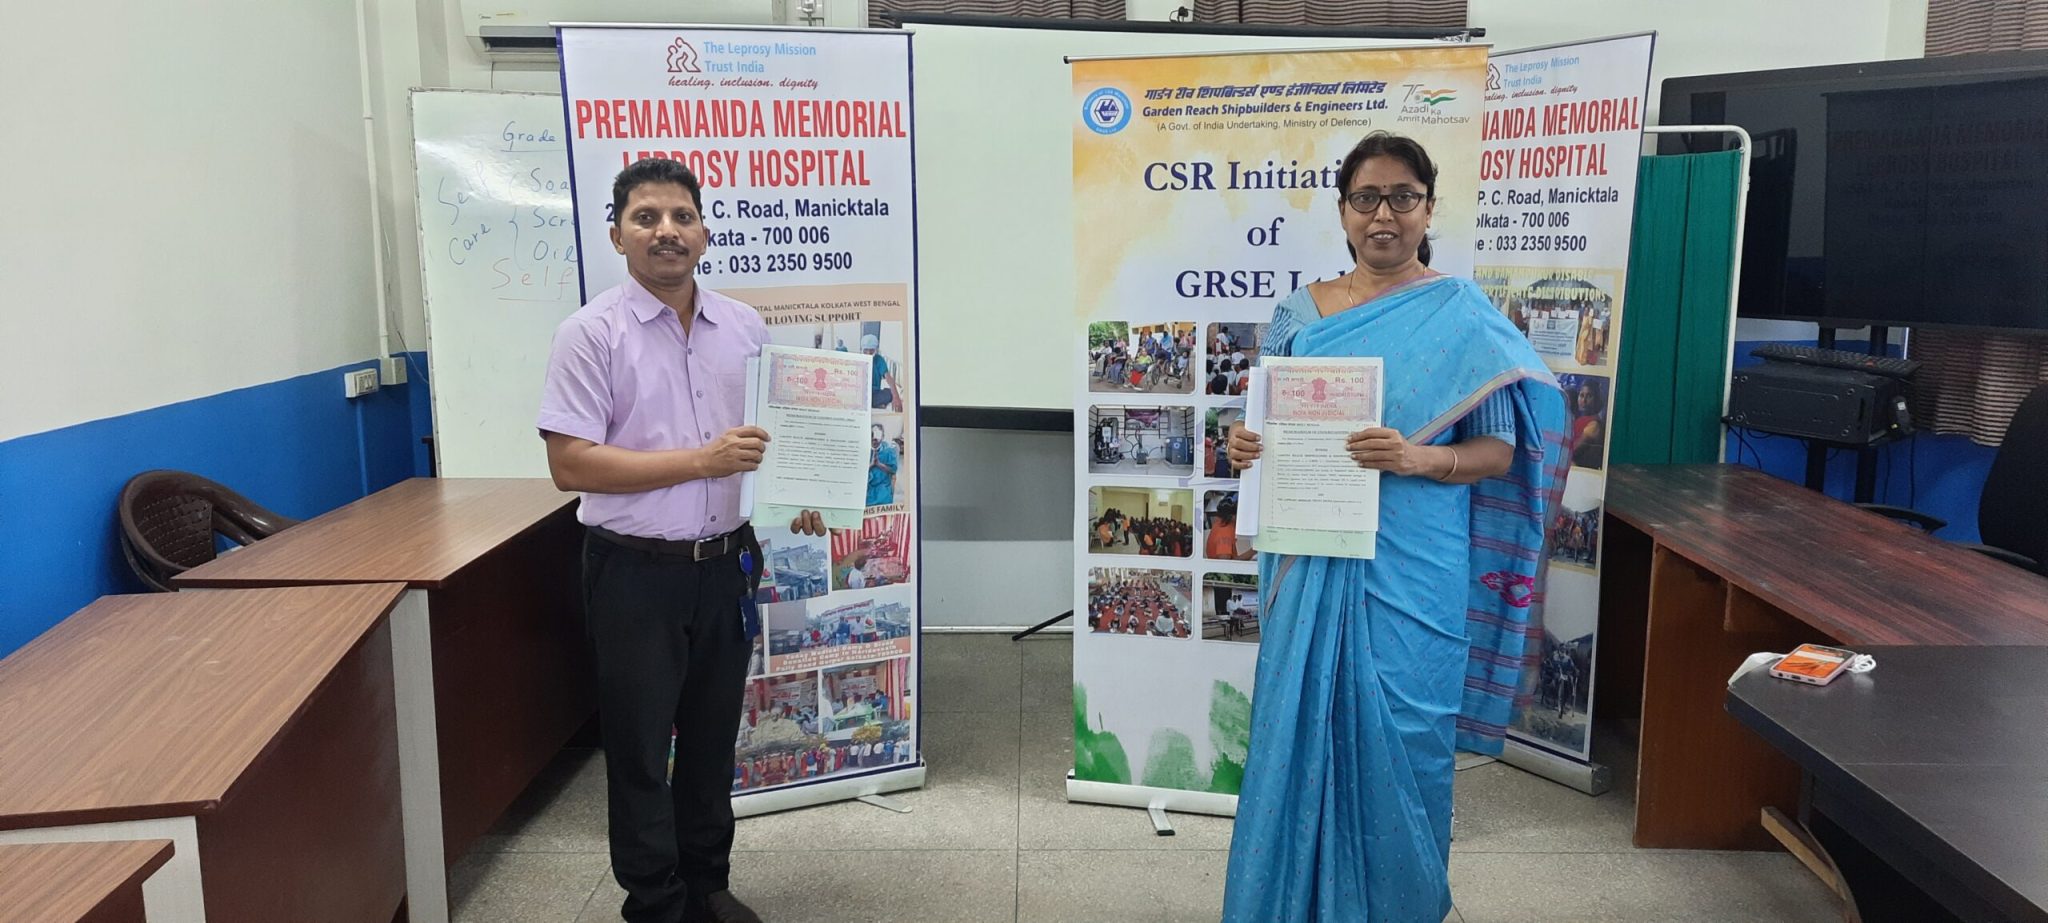 Image 1 - GRSE signed MoU with "The Leprosy Mission Trust India" to provide medical equipments to Premananda Memorial Hospital in Kolkata